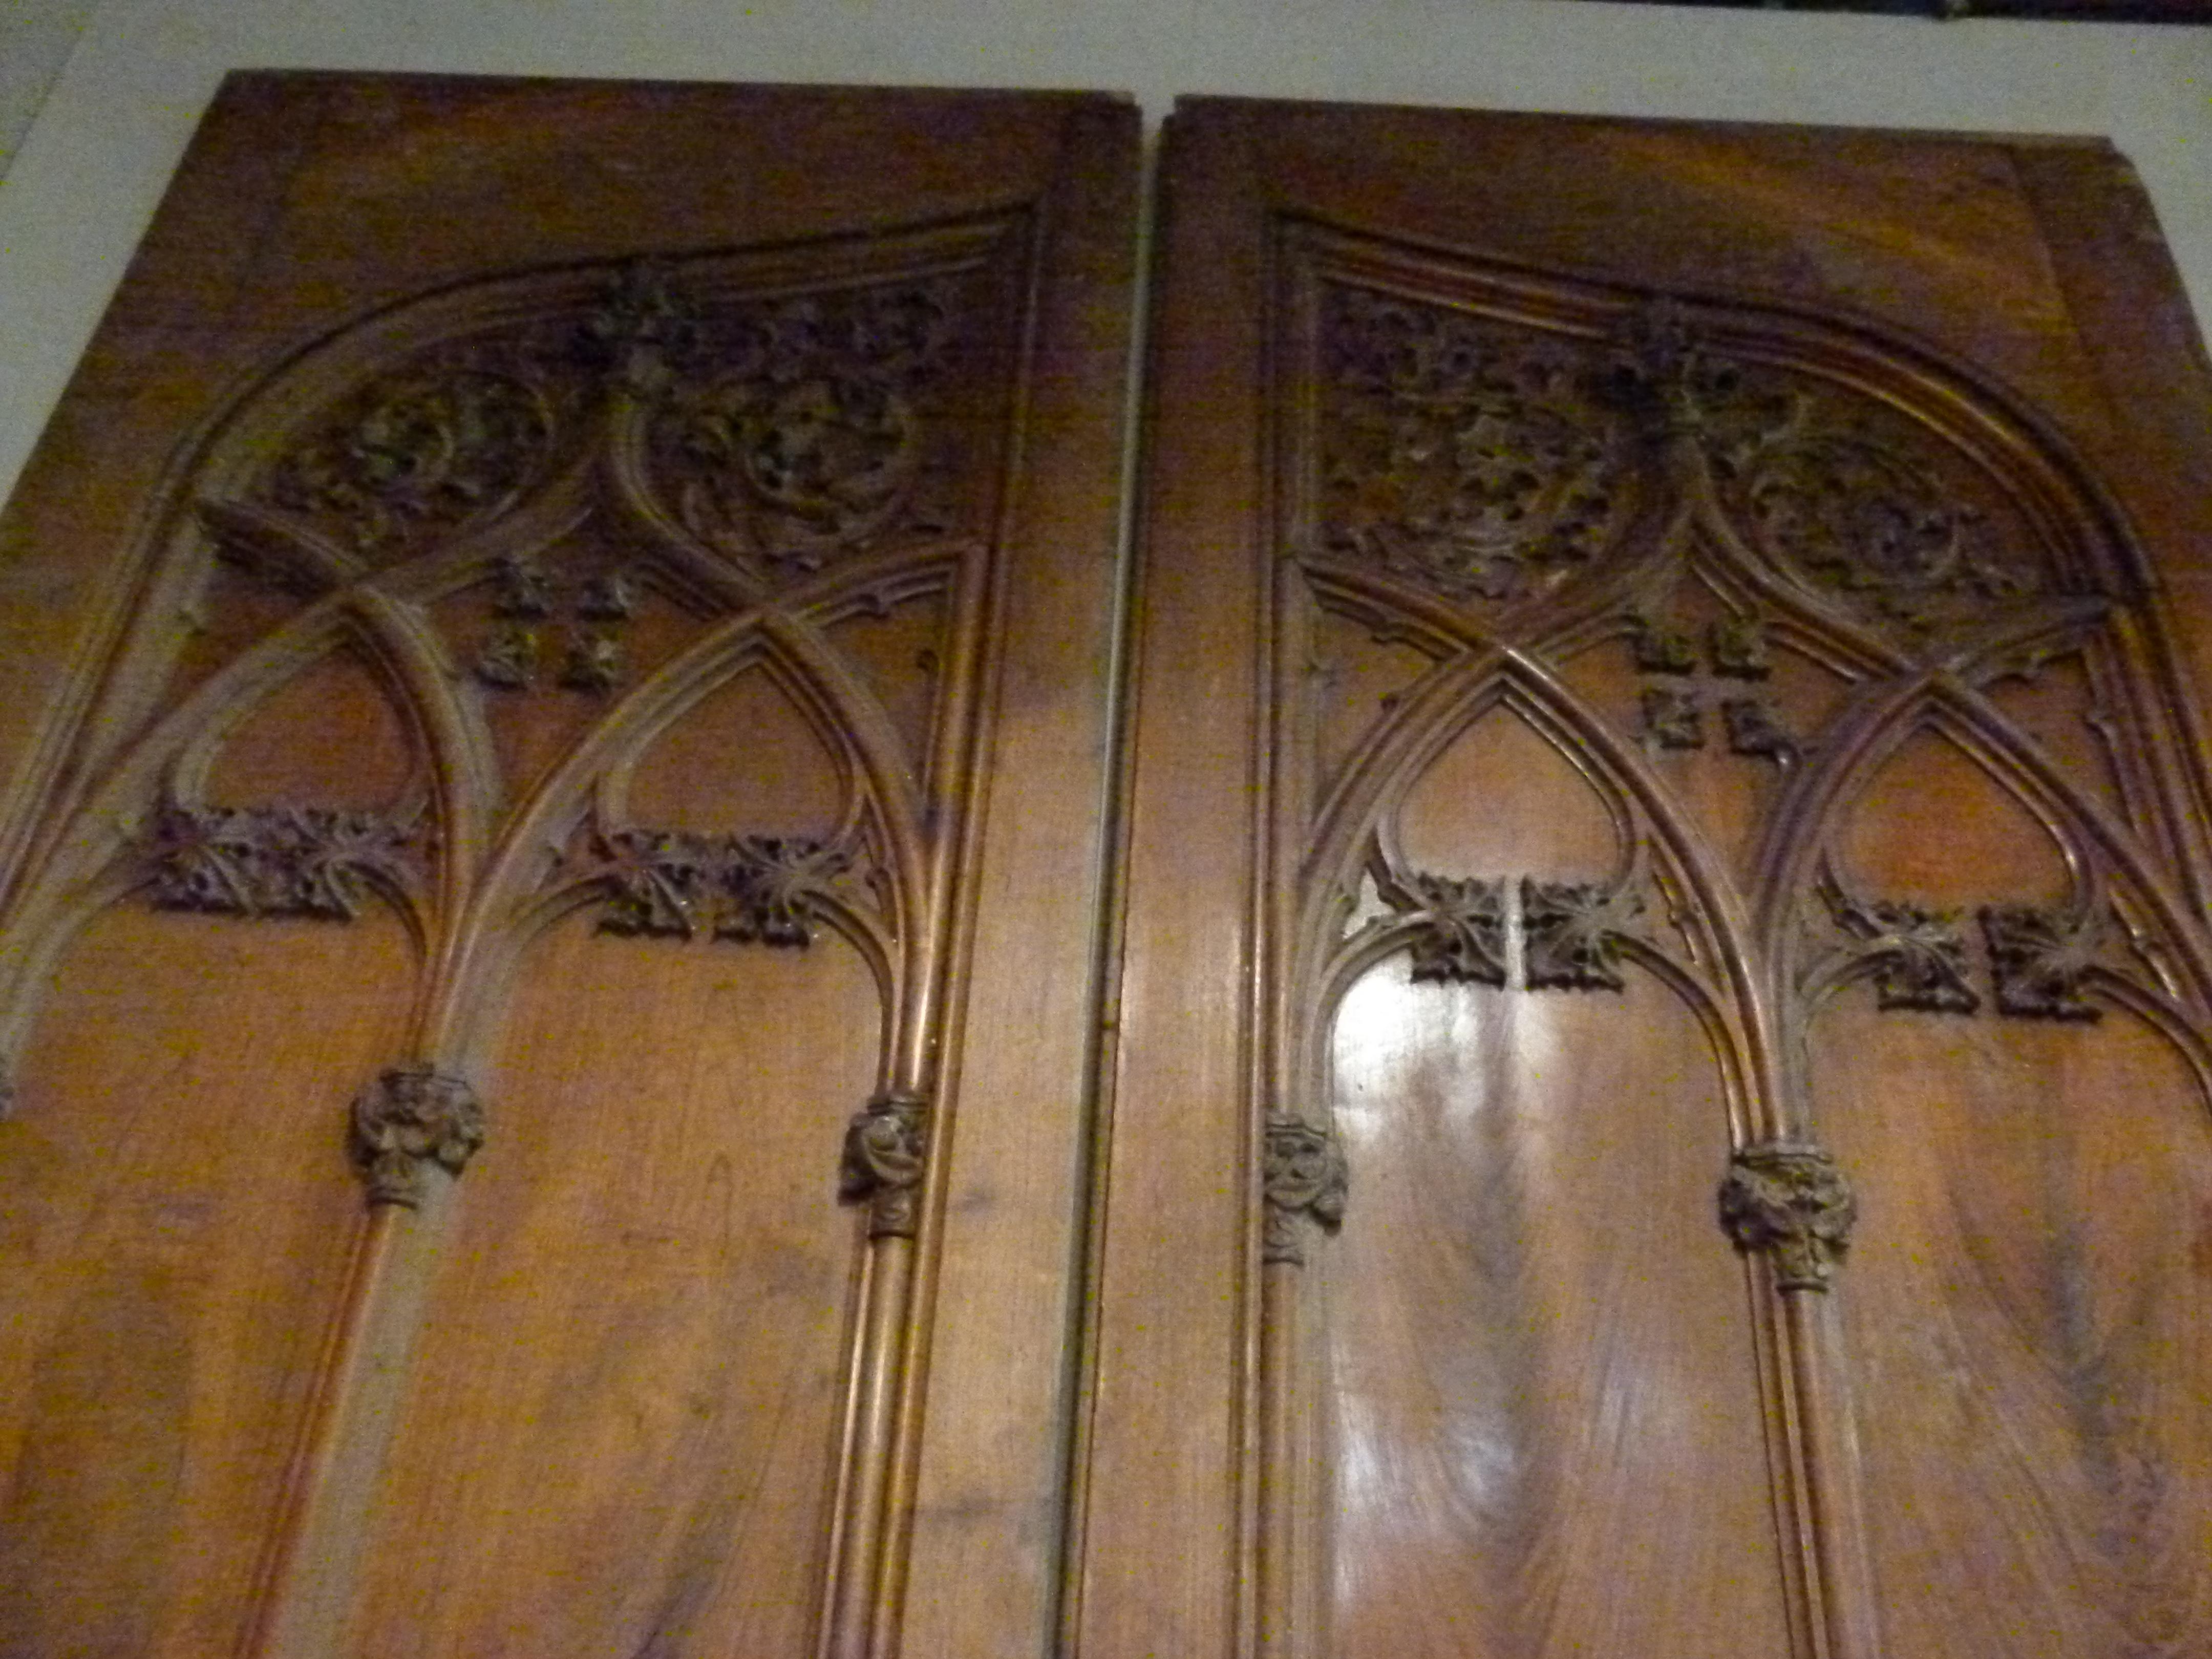 Gothic Revival Style Antique Wooden Double Leaf Door from Spain. Hand carved decorations in gothic revival style with Iron door handles in Seahorse shape.
The left leaf door has a minor loss as you will appreciate in one of the photos that we will